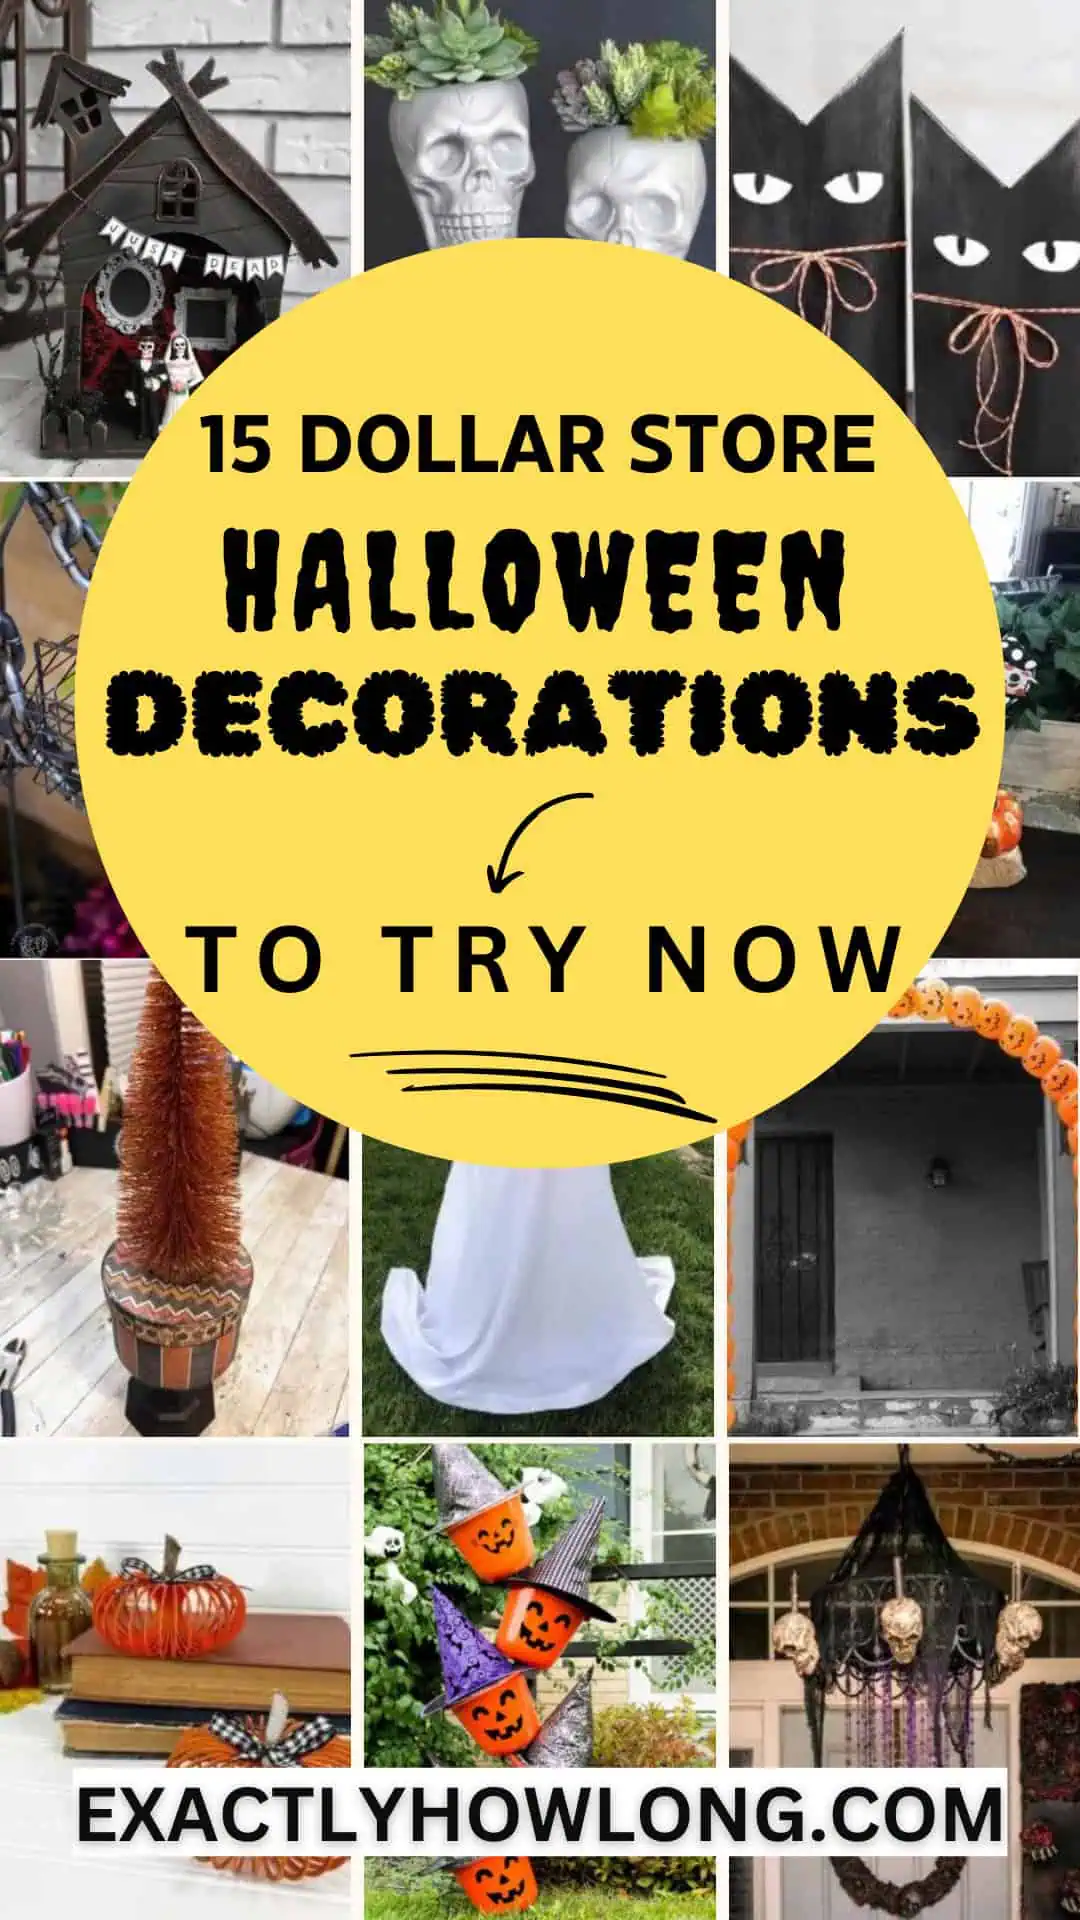 Halloween decorations from the dollar store: quick and budget-friendly DIY ideas.